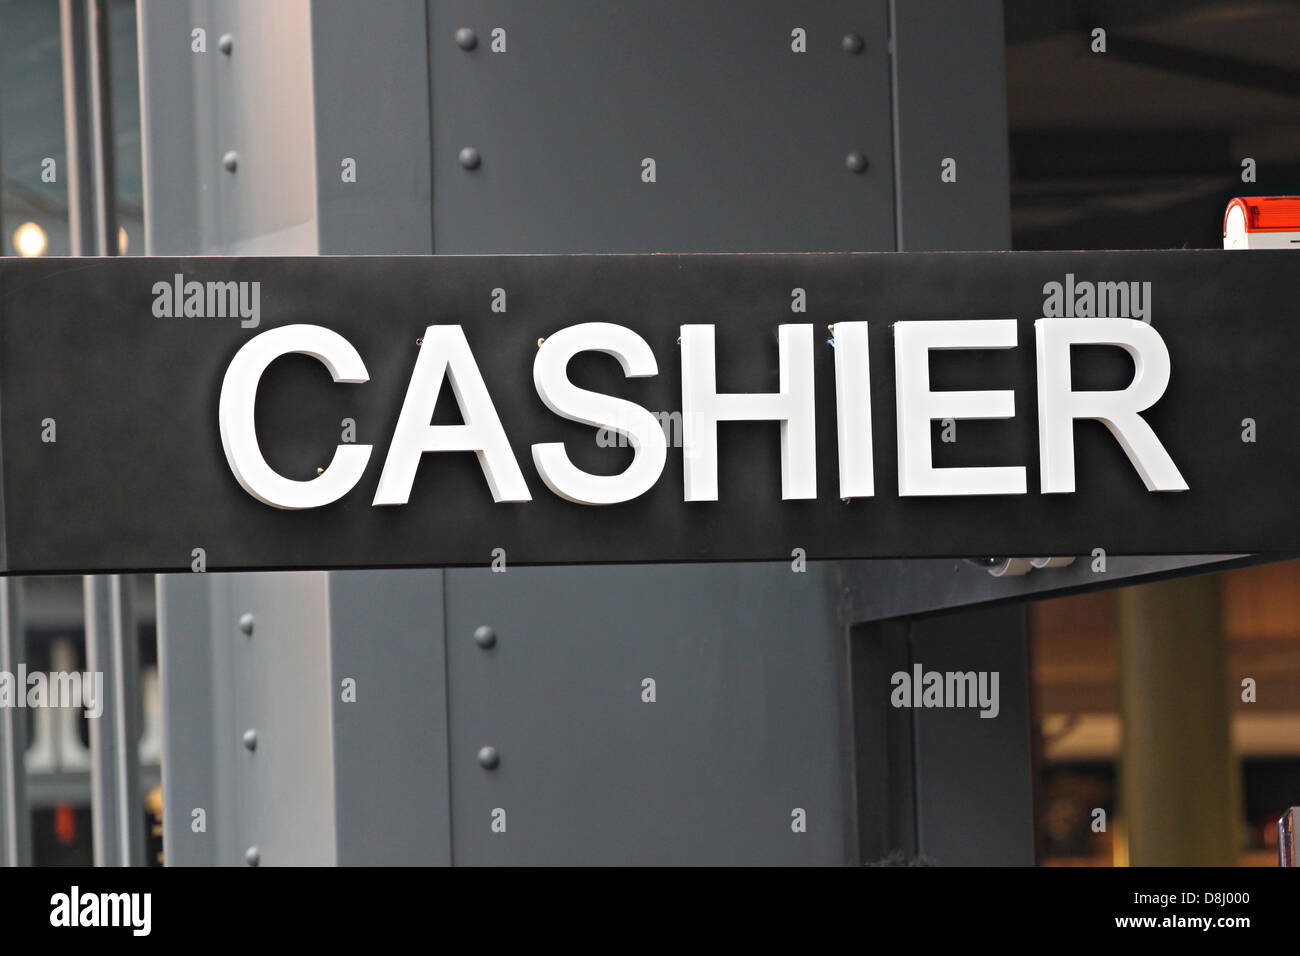 The Signposted of the cashier,White letters on black background. Stock Photo